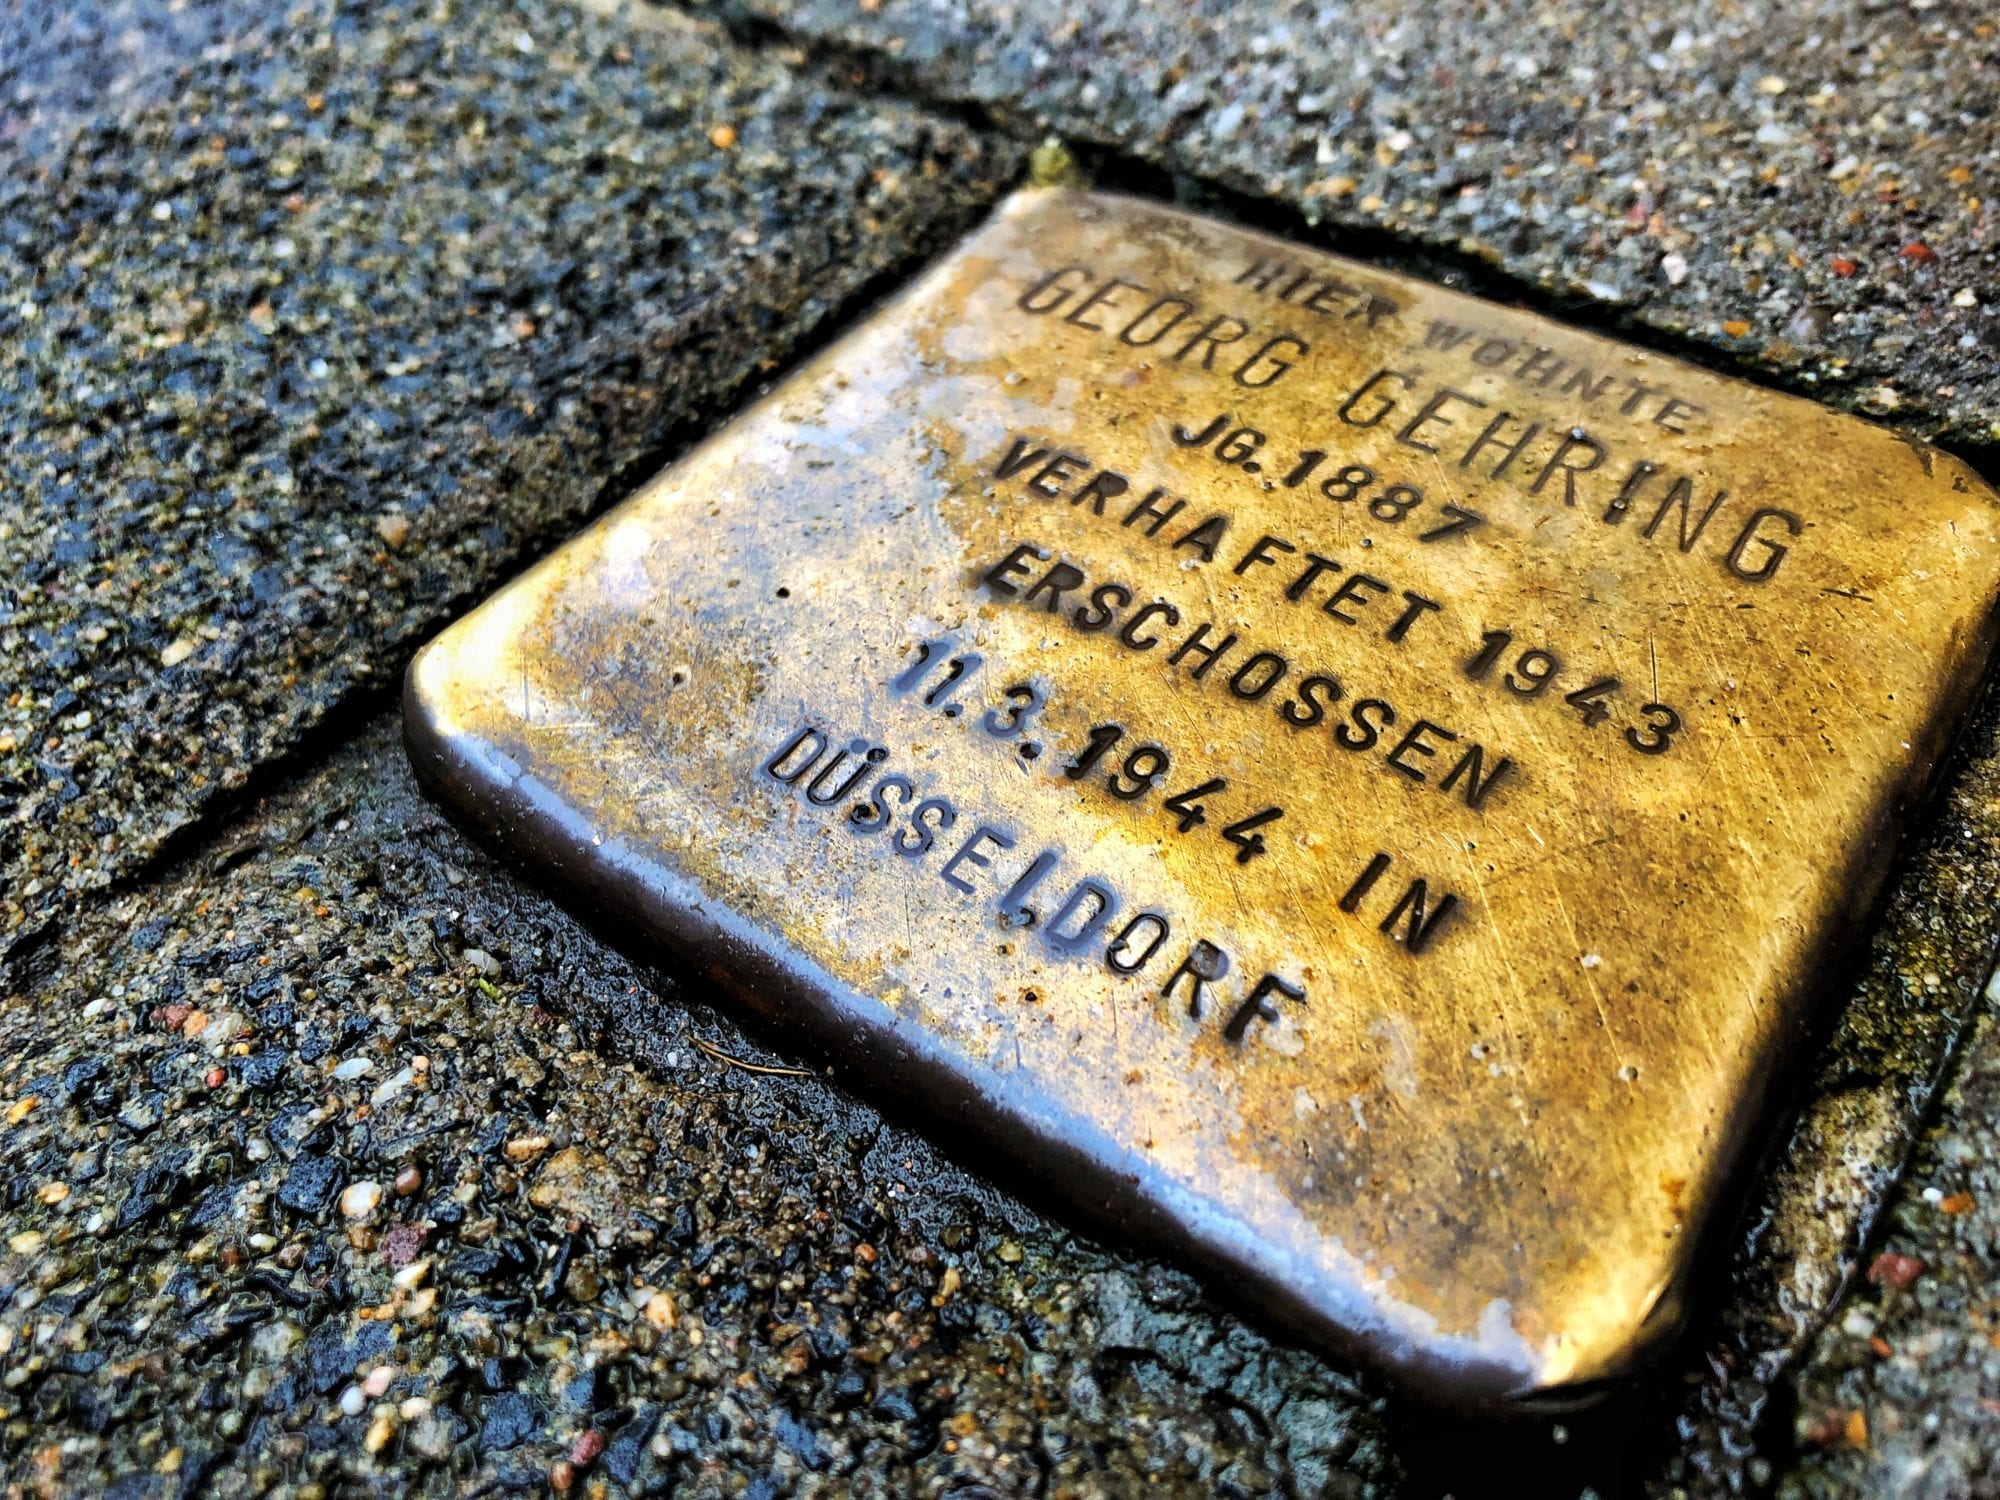 The 70,000+ Stolpersteine Memorial | Have You Ever Stopped to Read These?